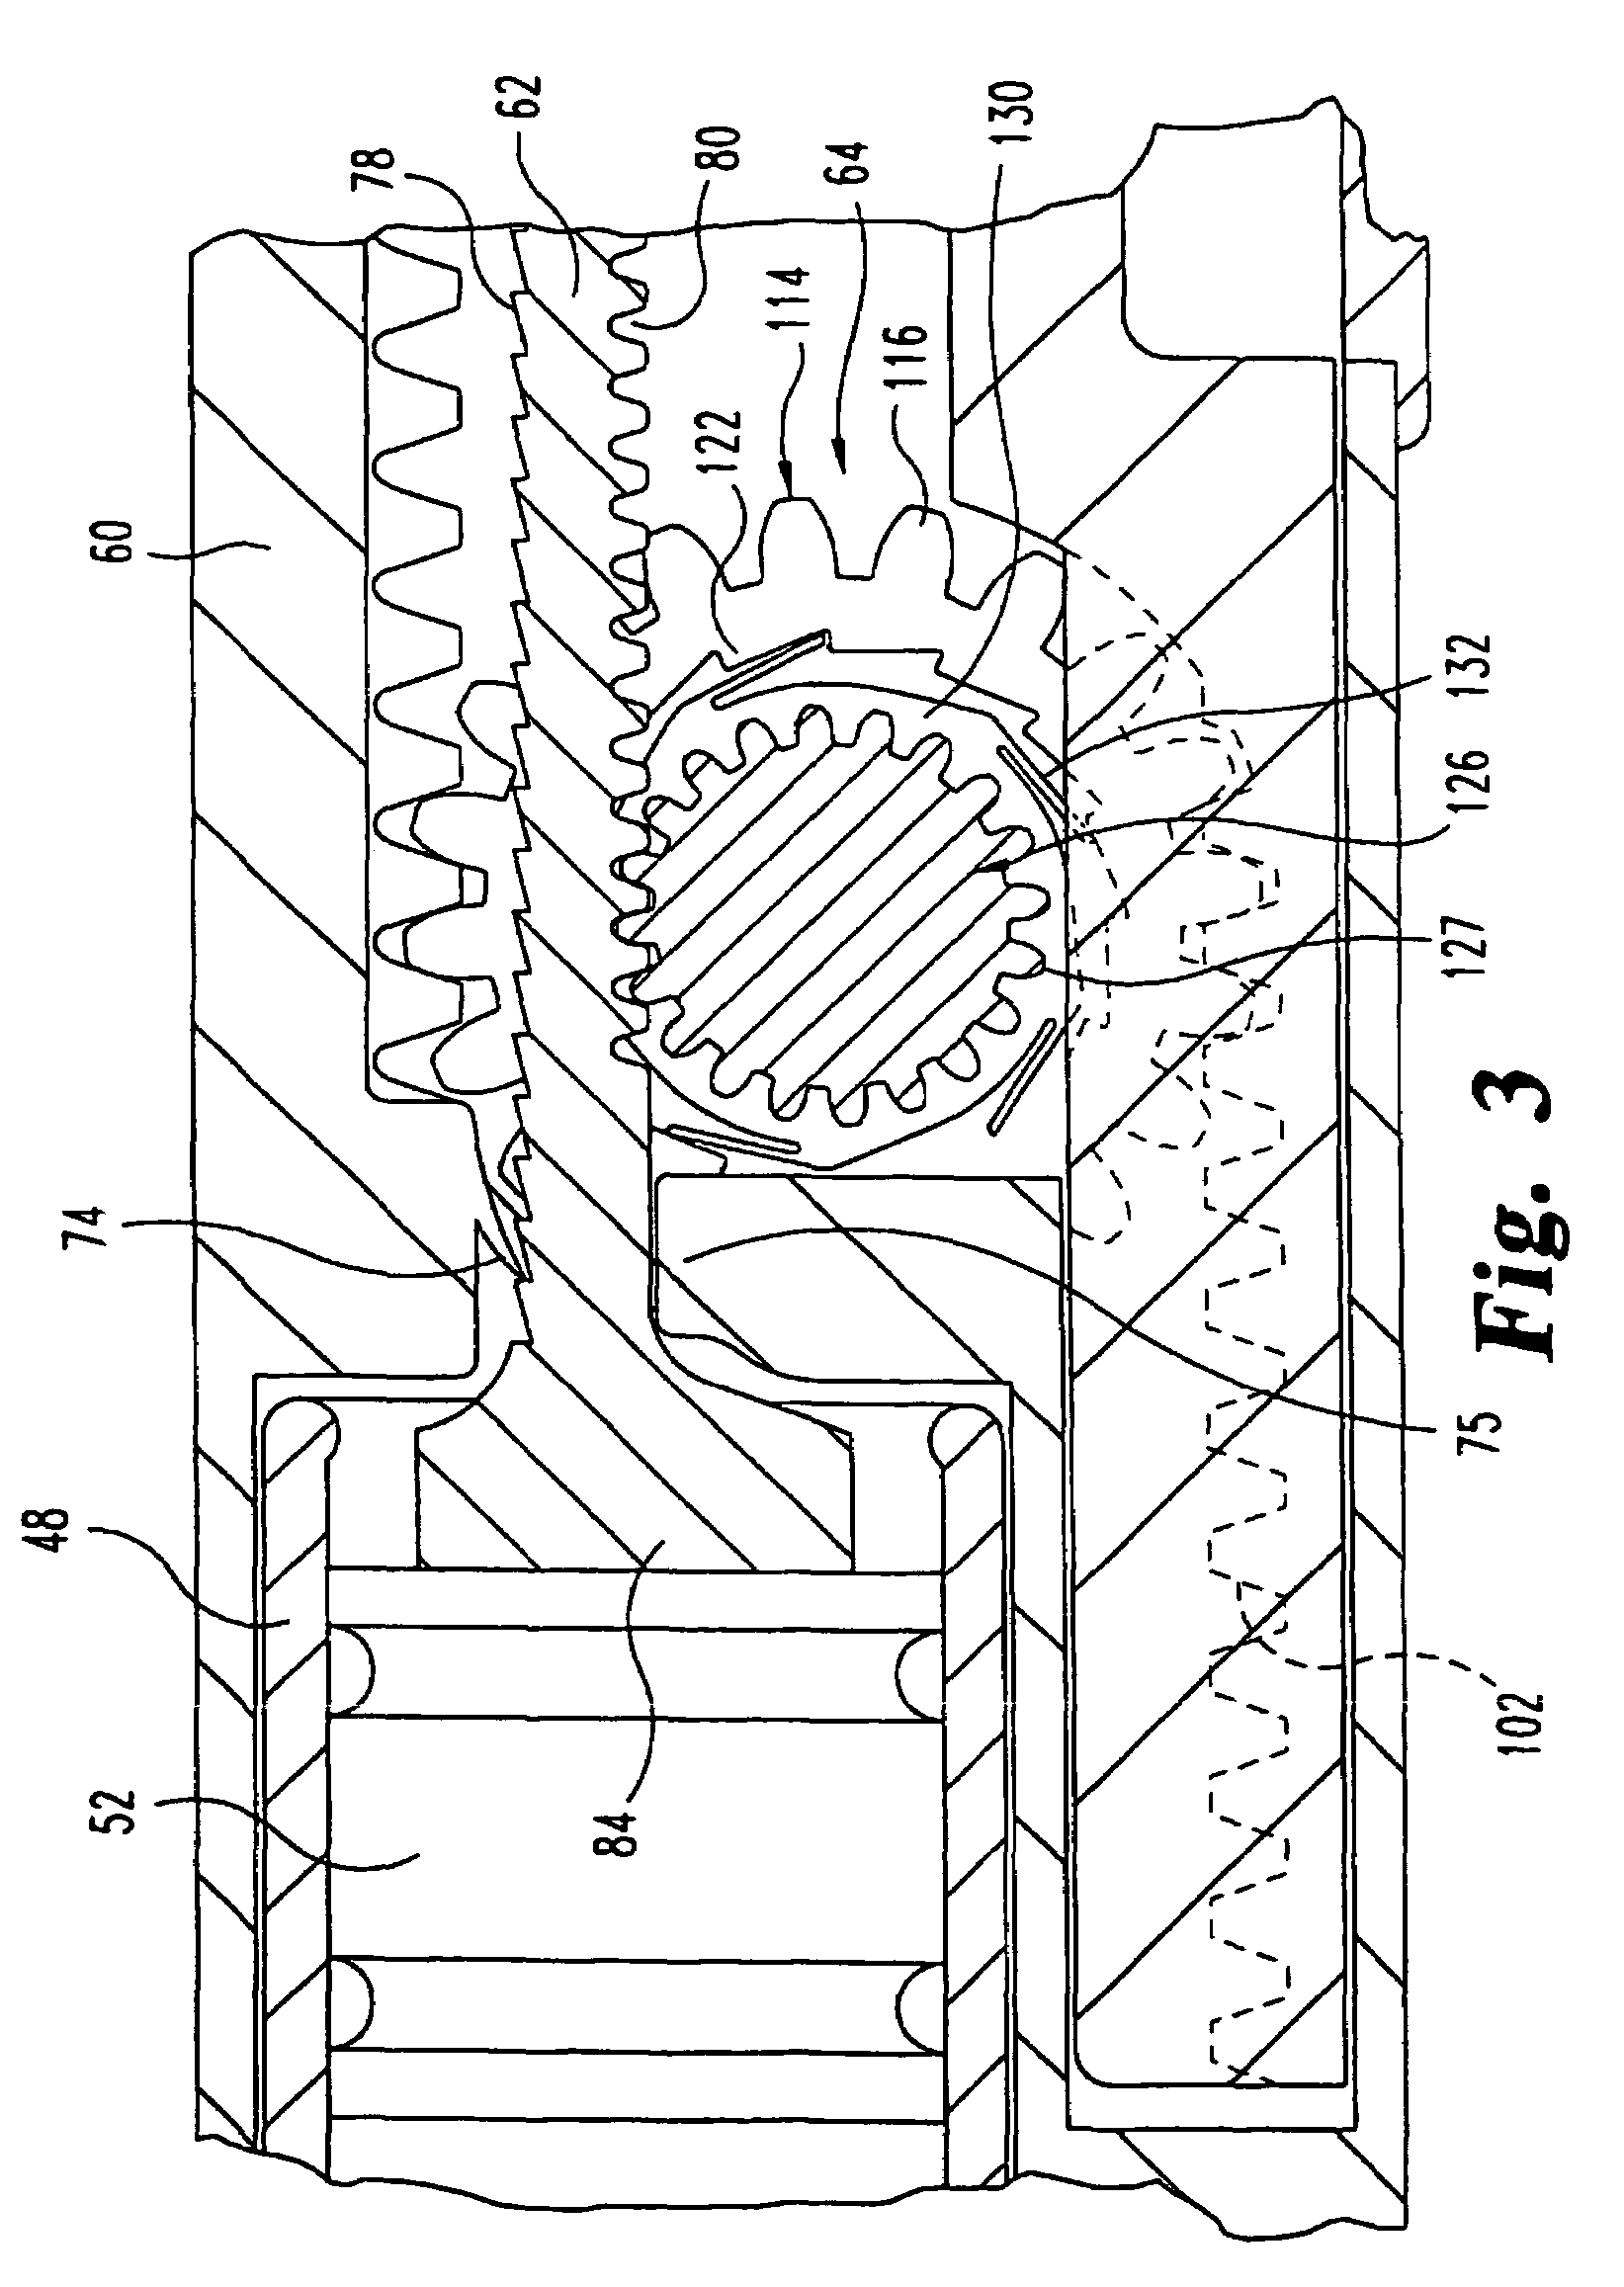 Medication dispensing apparatus with gear set for mechanical advantage